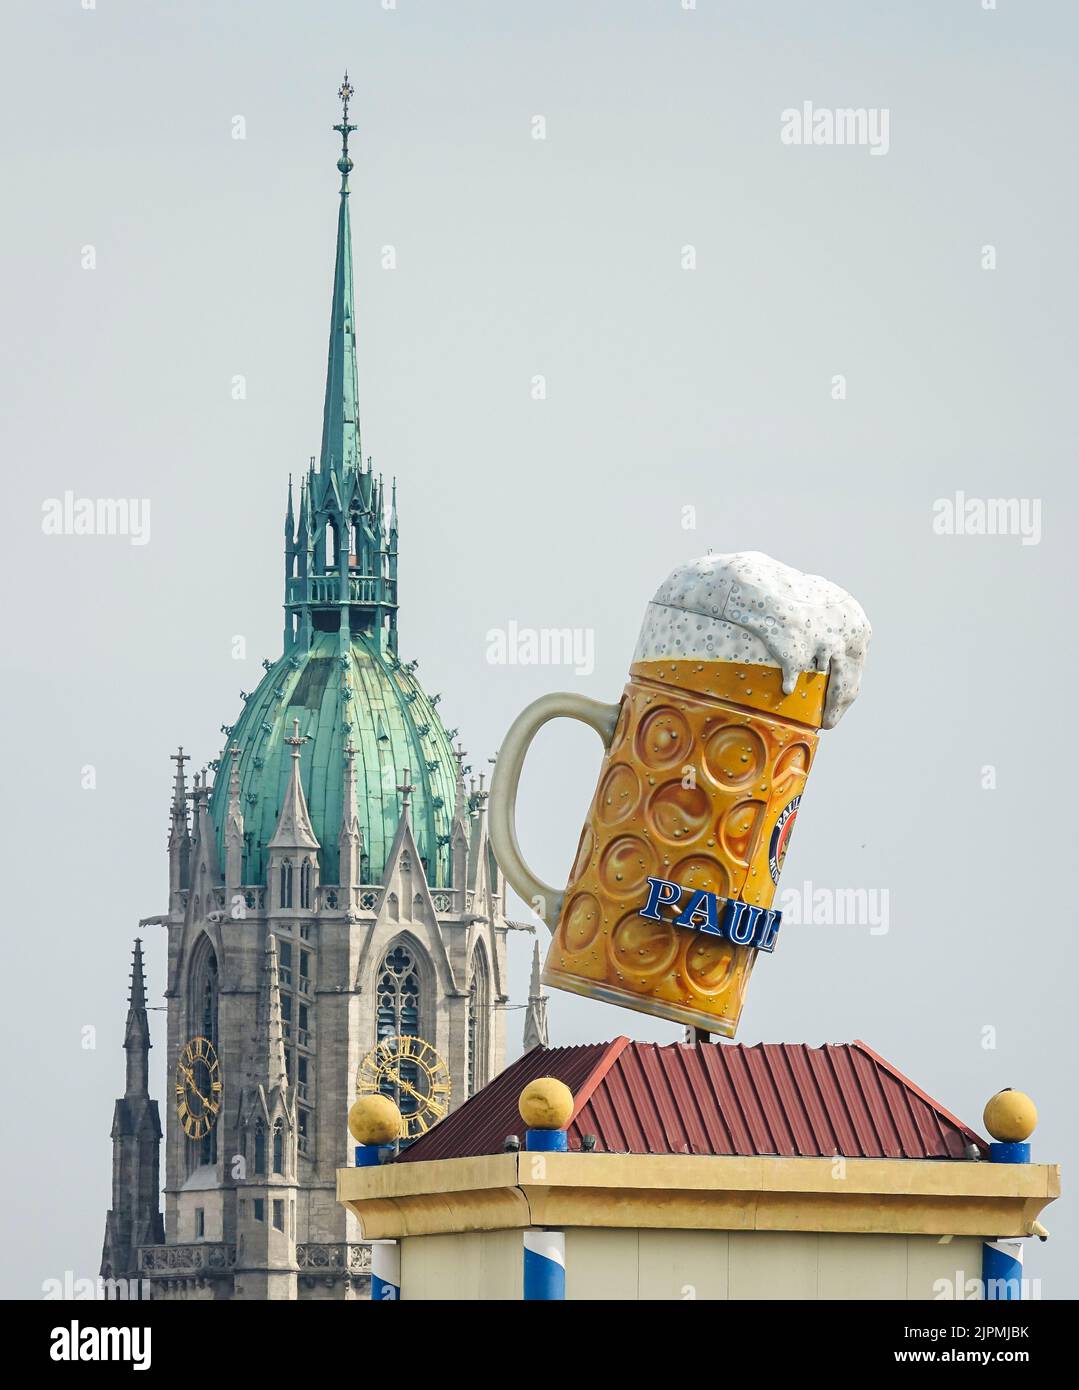 Munich Octoberfest, a large beer mug in Theresienwiese against the backdrop of St. Paul's Gothic church. Munich, GERMANY - August 2022 Stock Photo